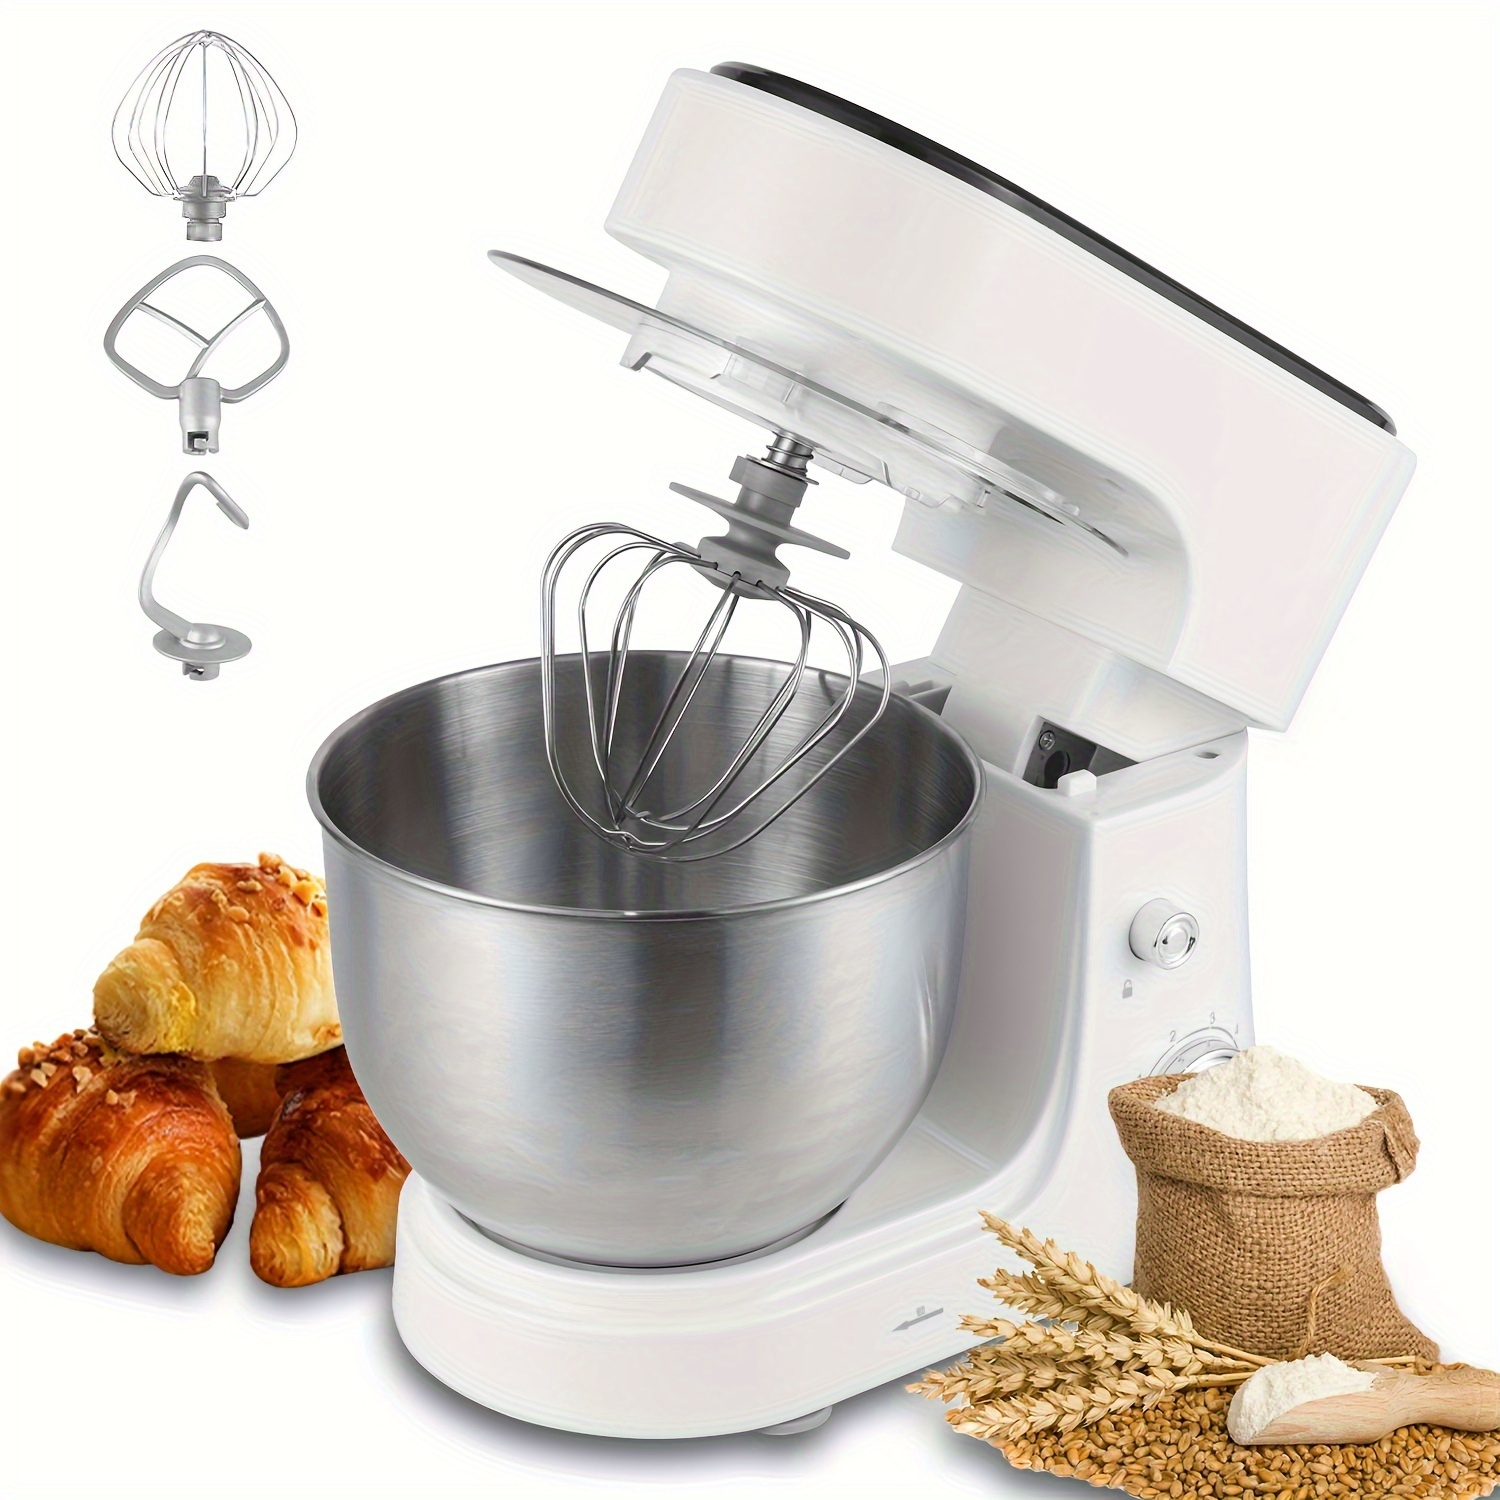 2 in 1 stand mixer & hand mixer food blender with dough hooks whisk mixing  bowl